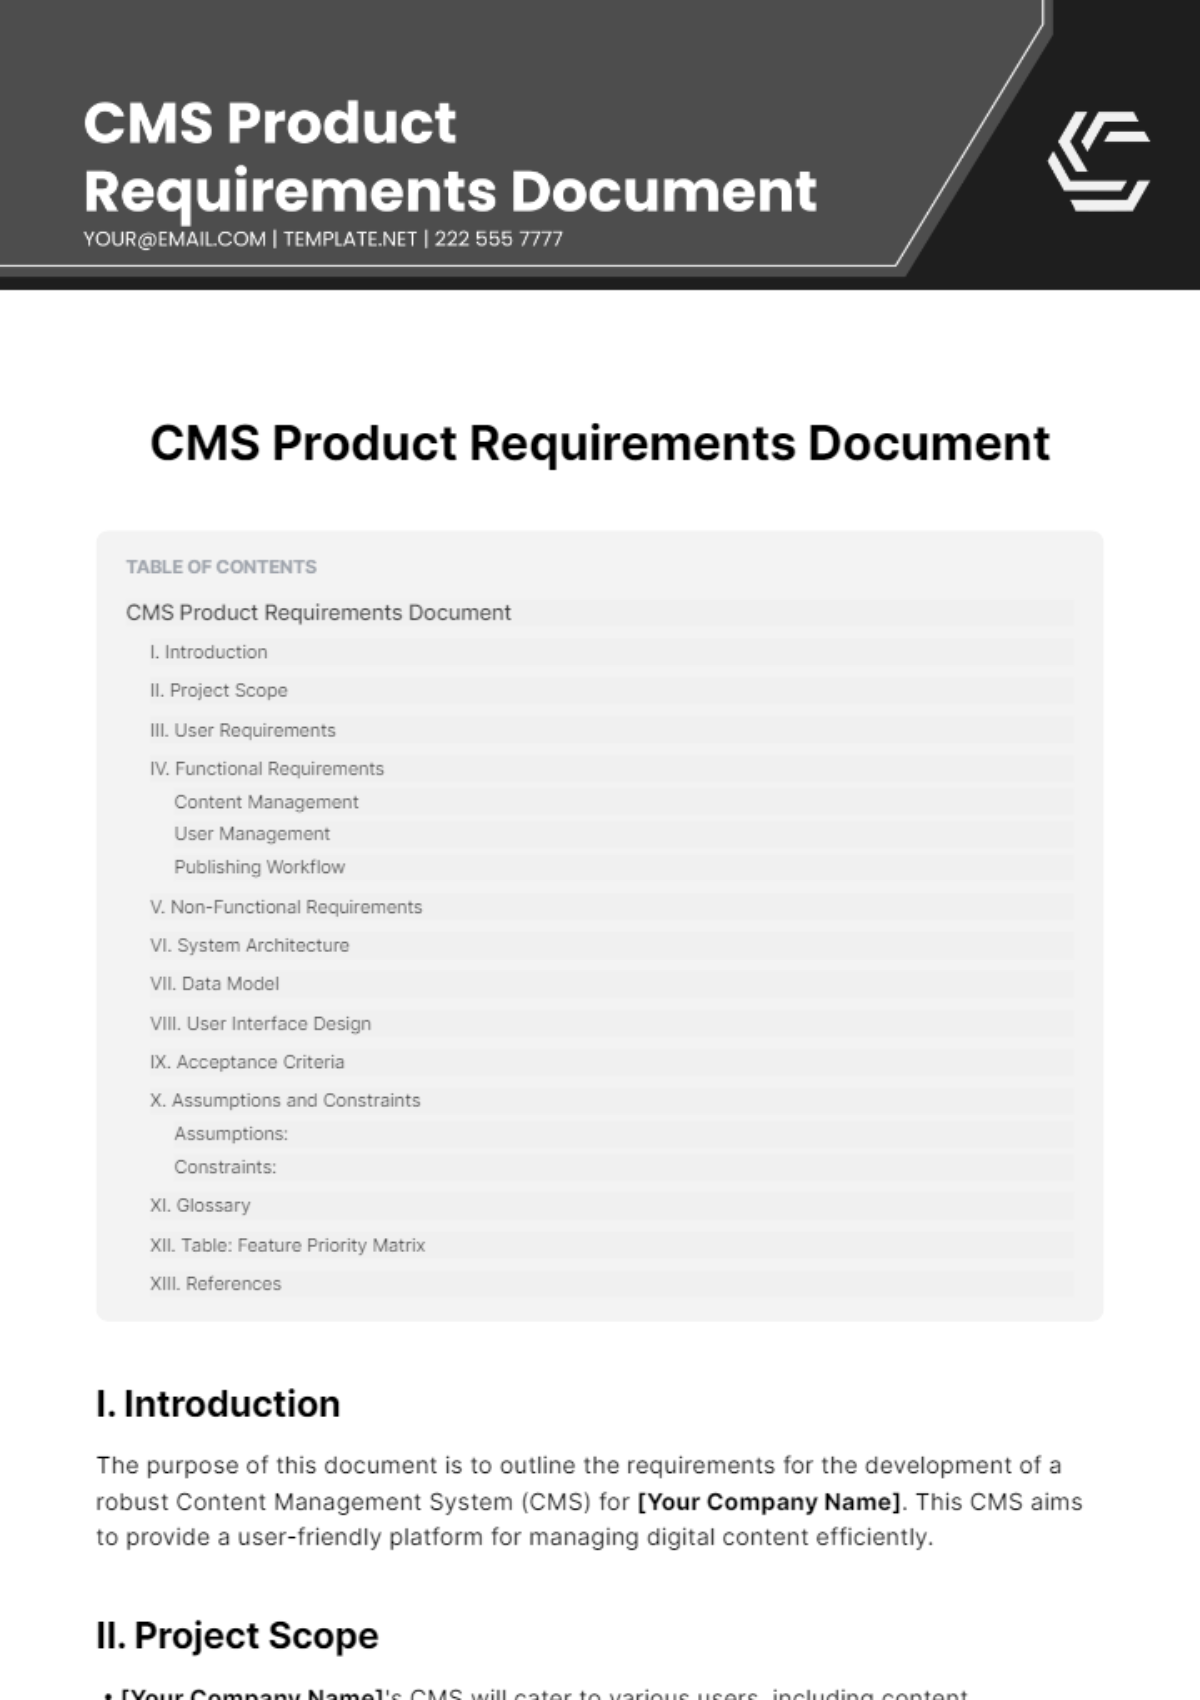  CMS Product Requirements Document Template